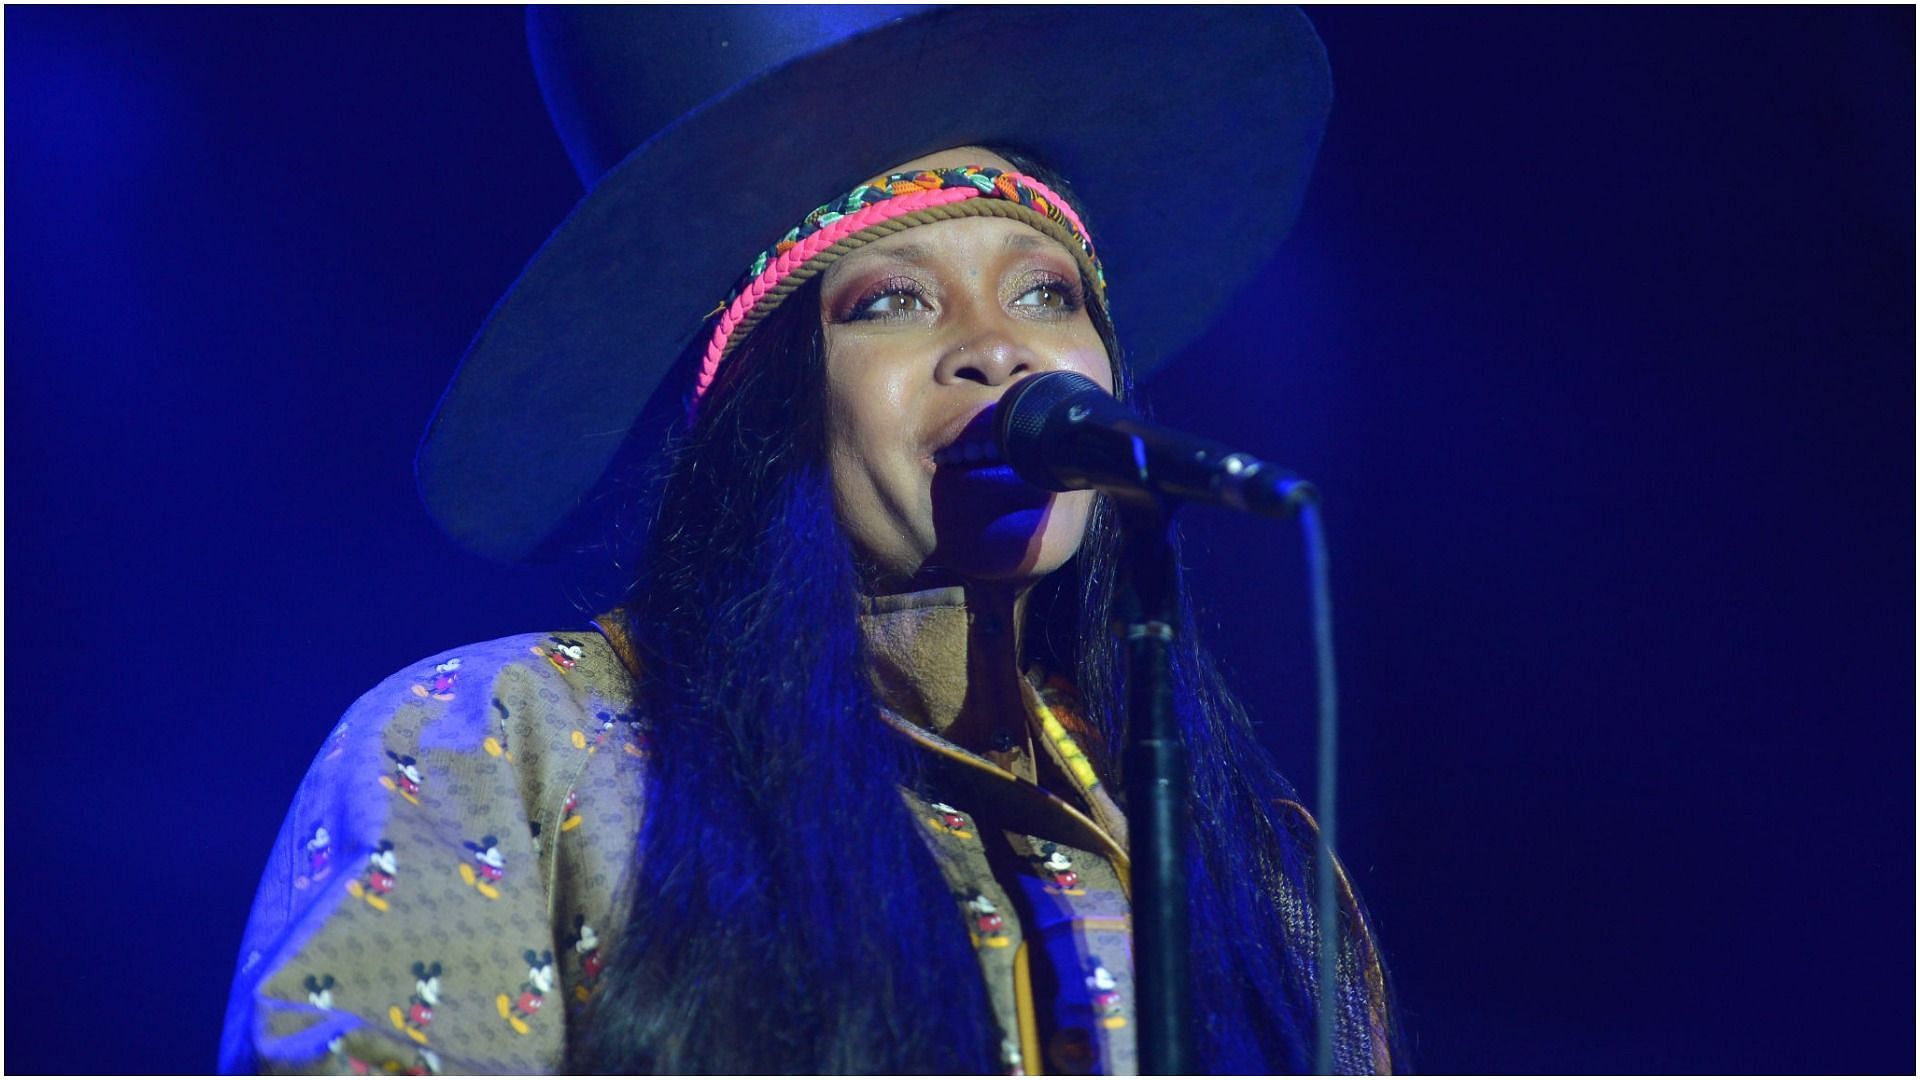 Erykah Badu revealed the identity of her new boyfriend recently on Instagram (Image by Johnny Louis via Getty Images)